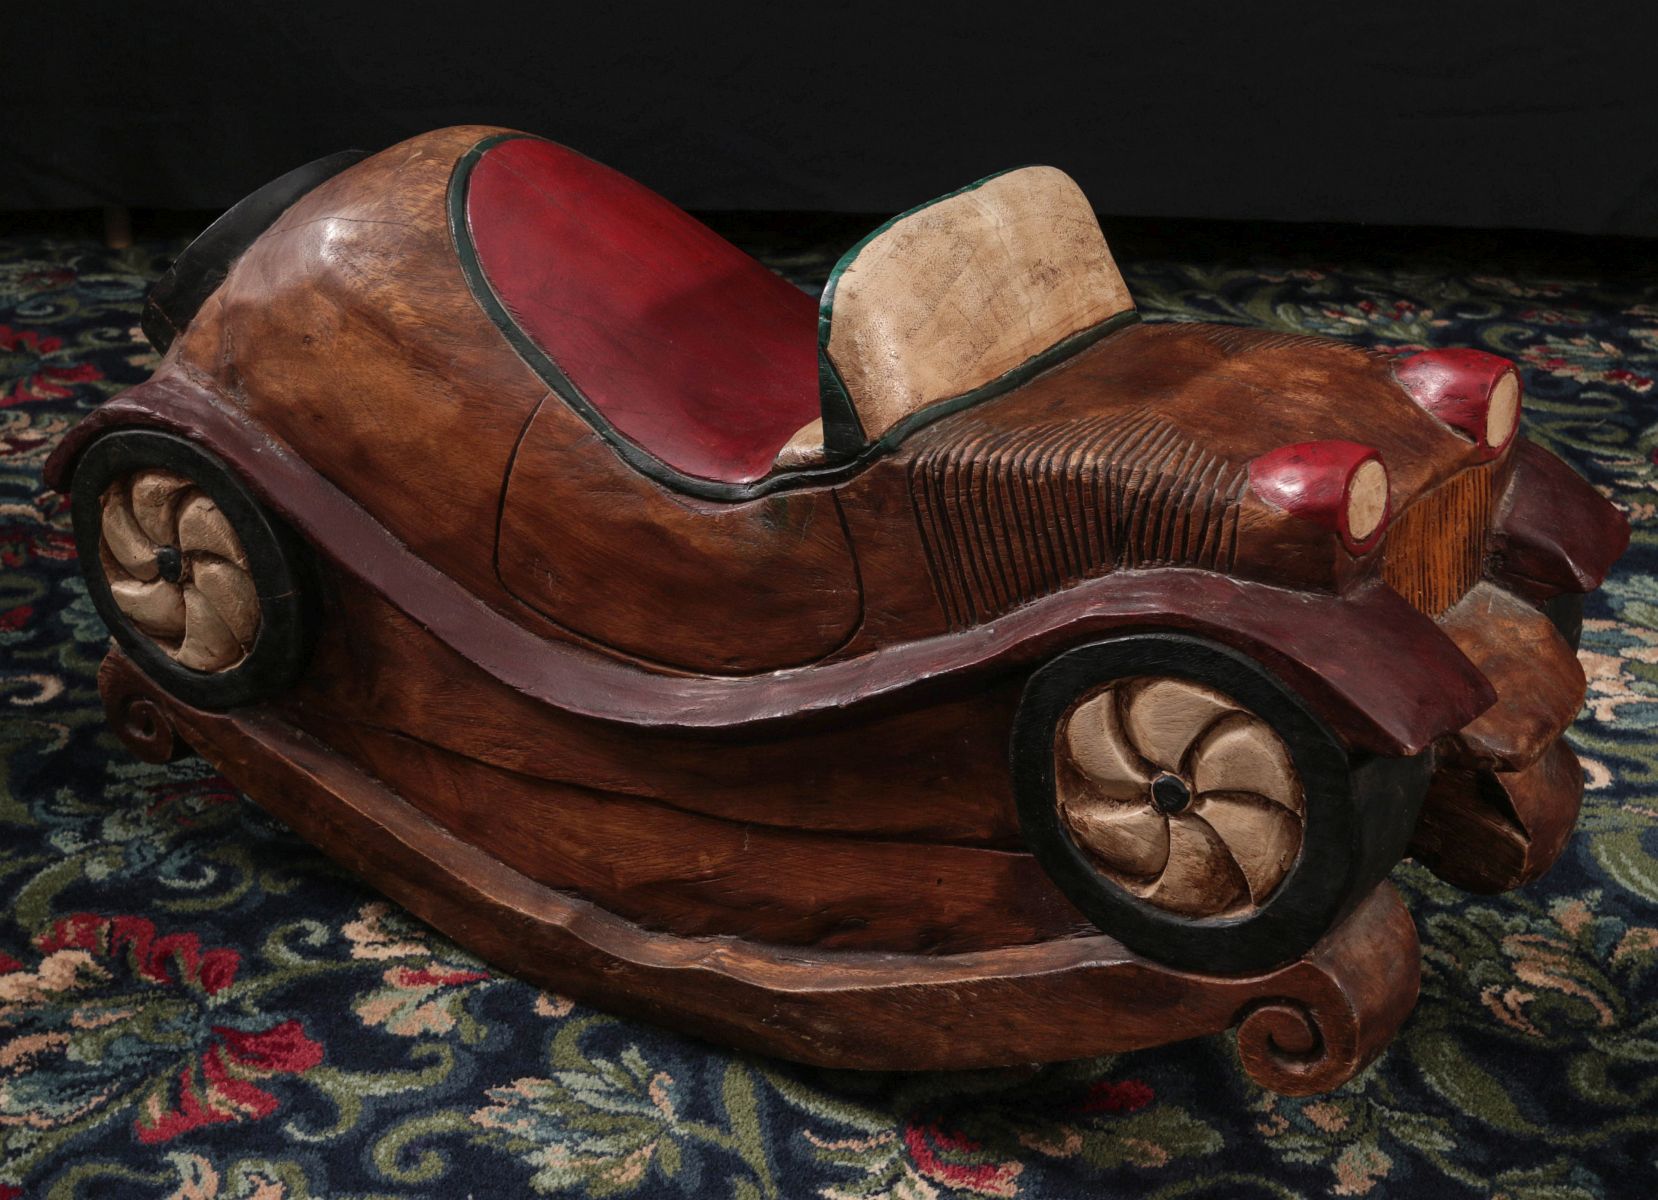 A CARVED AND PAINTED CHILD'S ROCKING RIDE-ON TOY